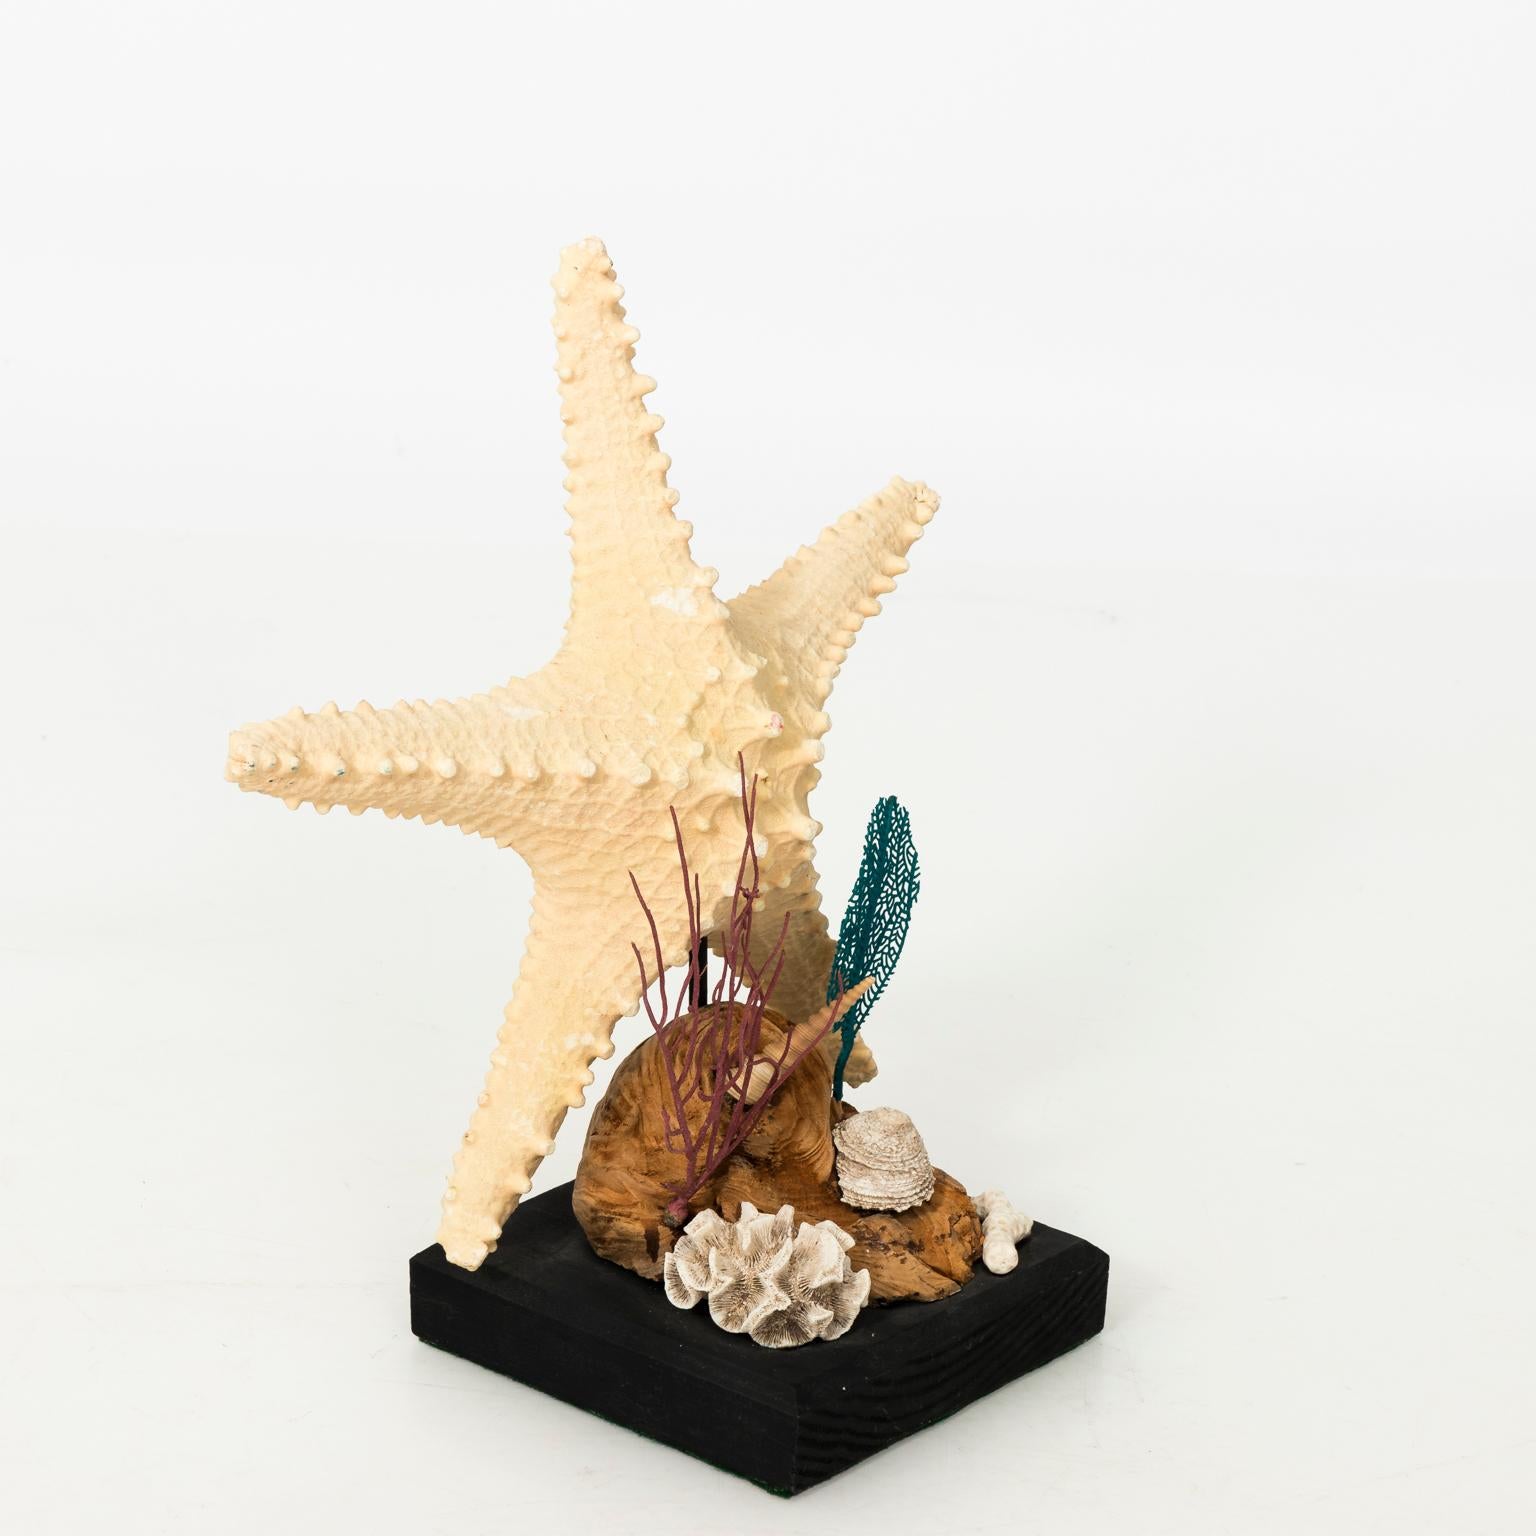 Decorative nautical shell display with coral and starfish on a wood stand, circa 20th century.
 